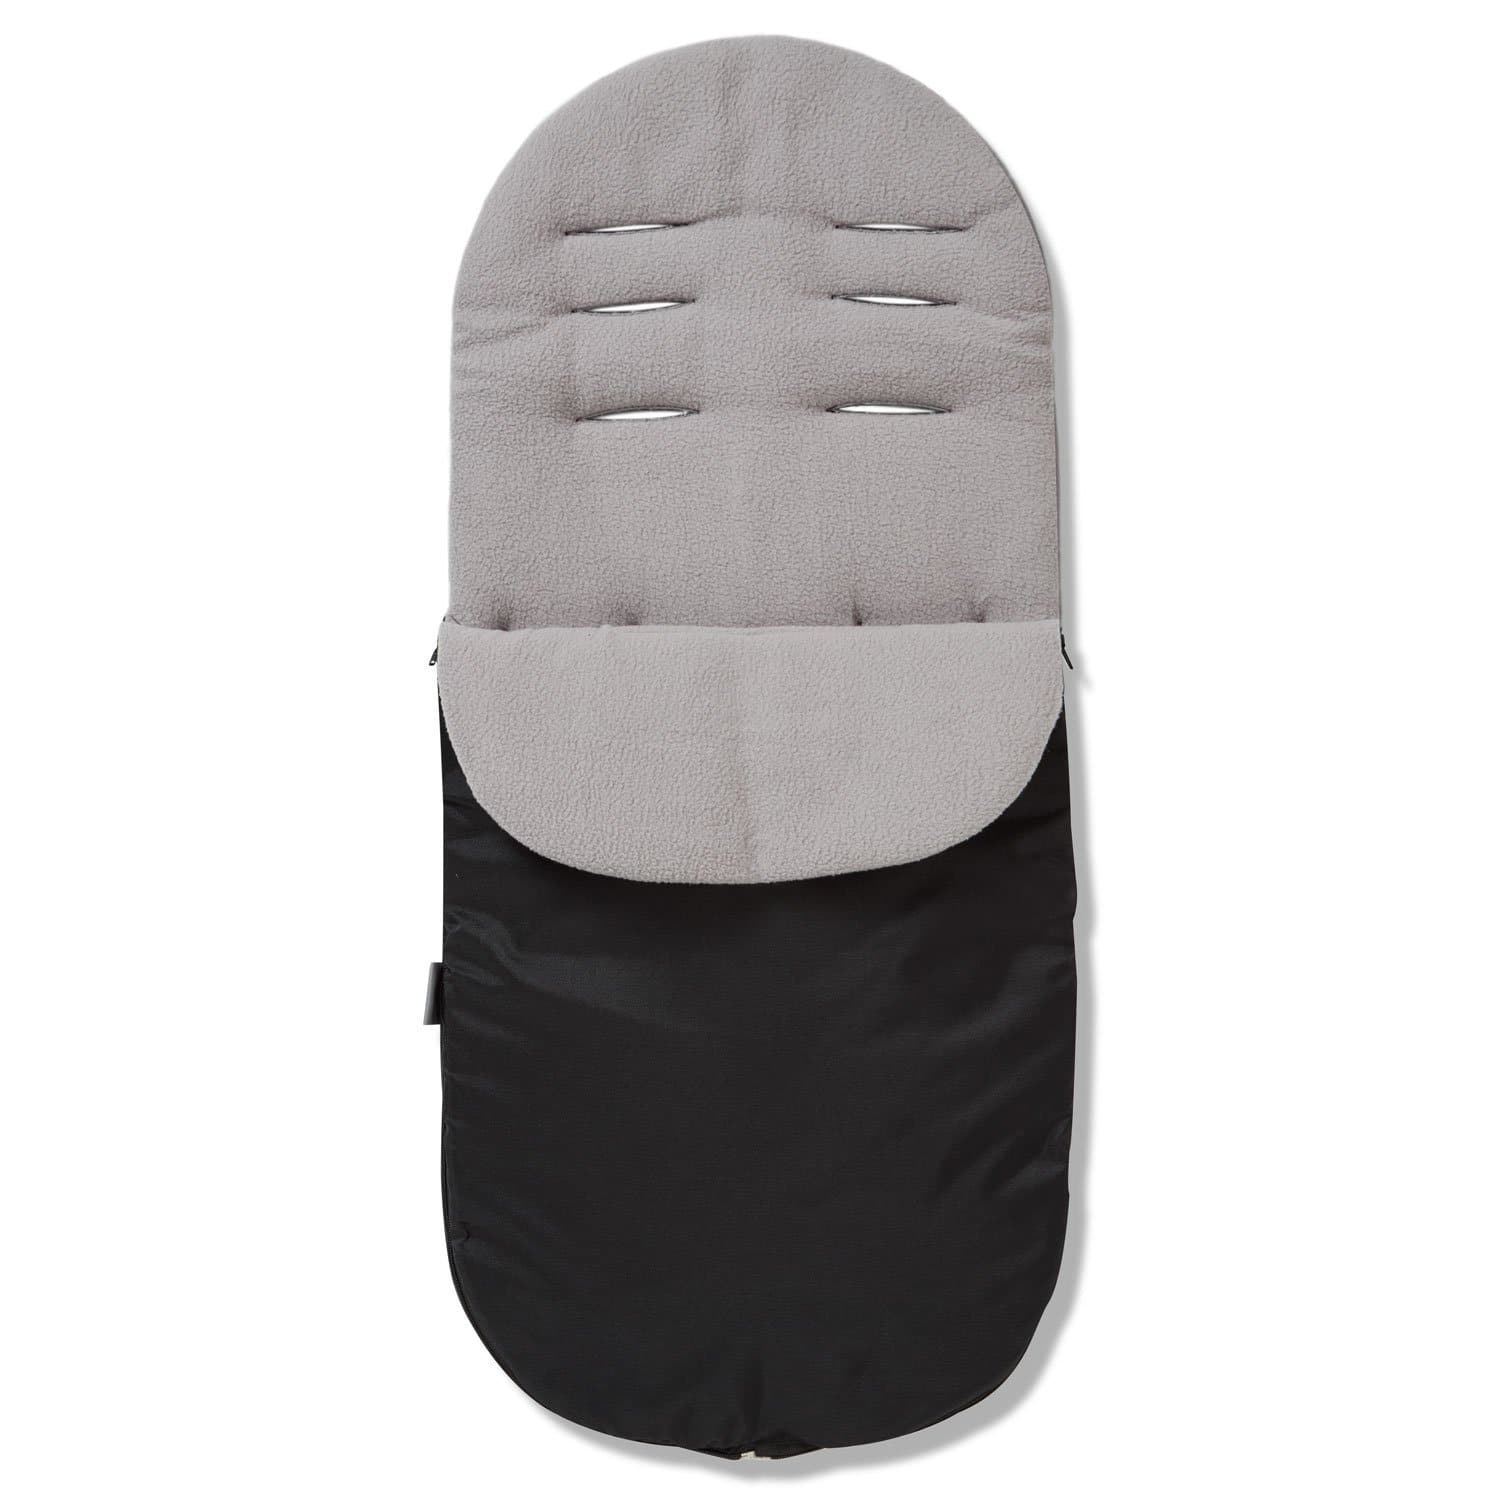 Footmuff / Cosy Toes Compatible with Emmaljunga - Grey / Fits All Models | For Your Little One